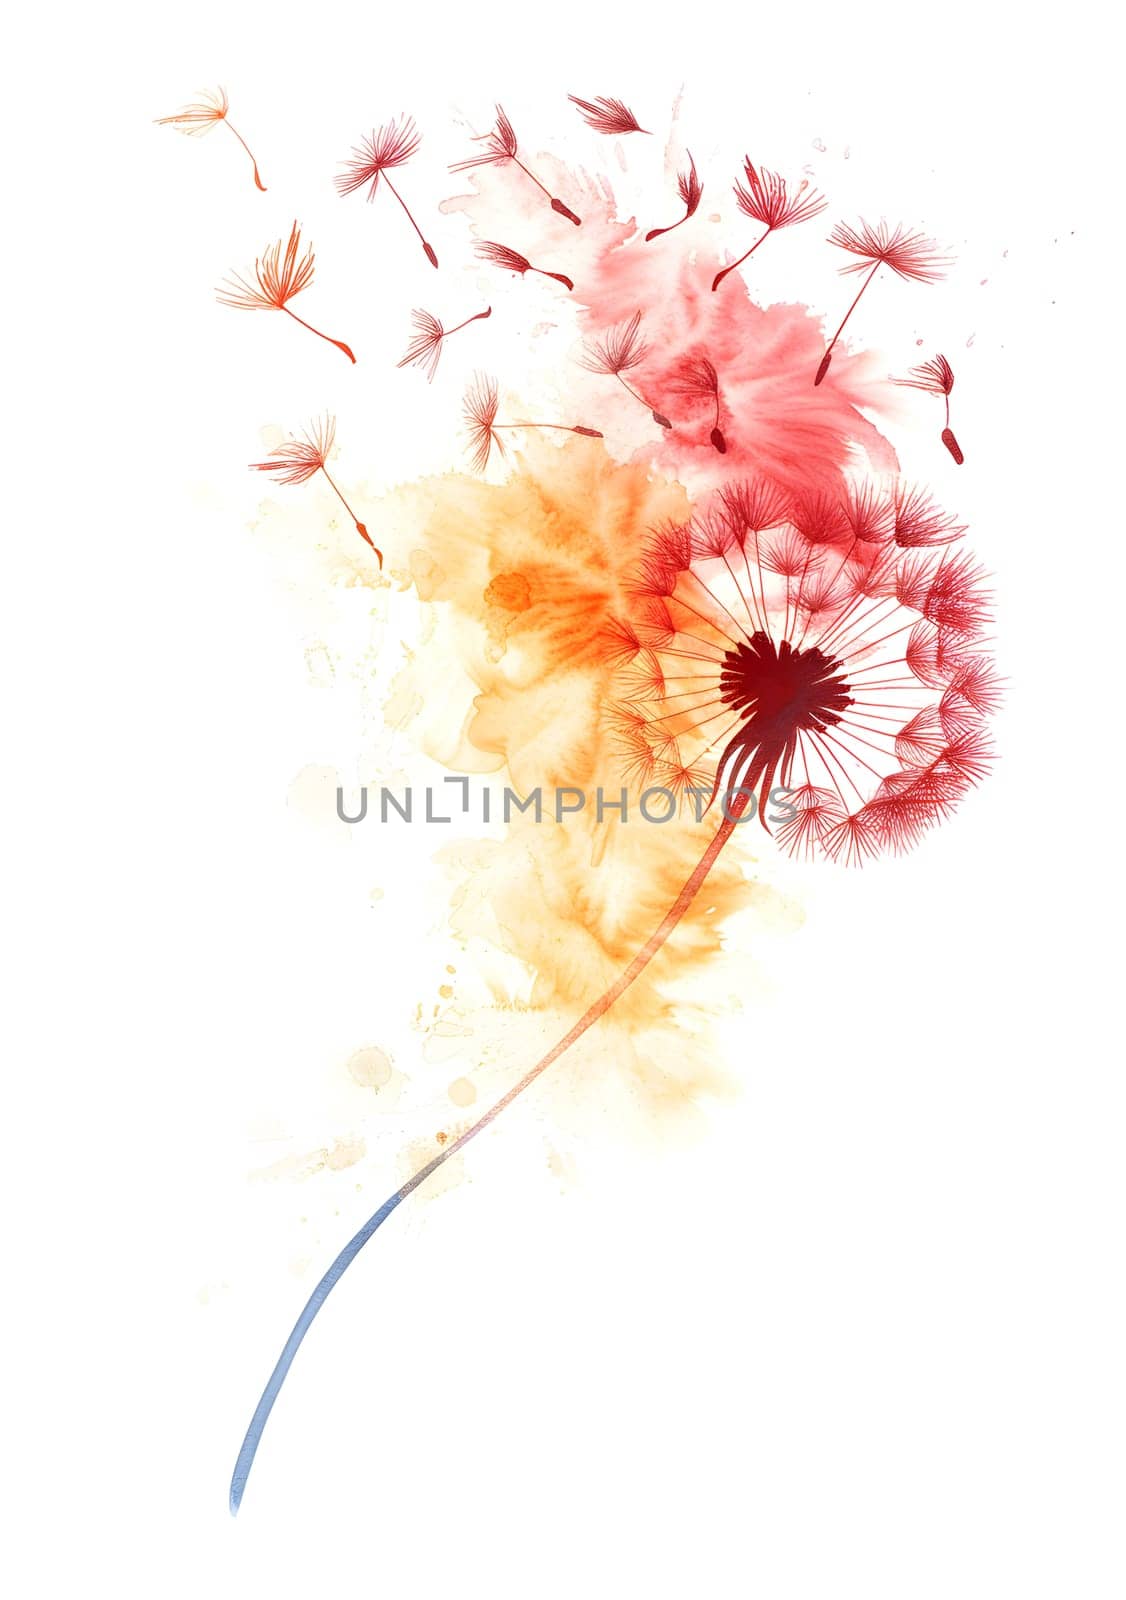 Watercolor painting of a dandelion with seeds drifting in the wind by Nadtochiy